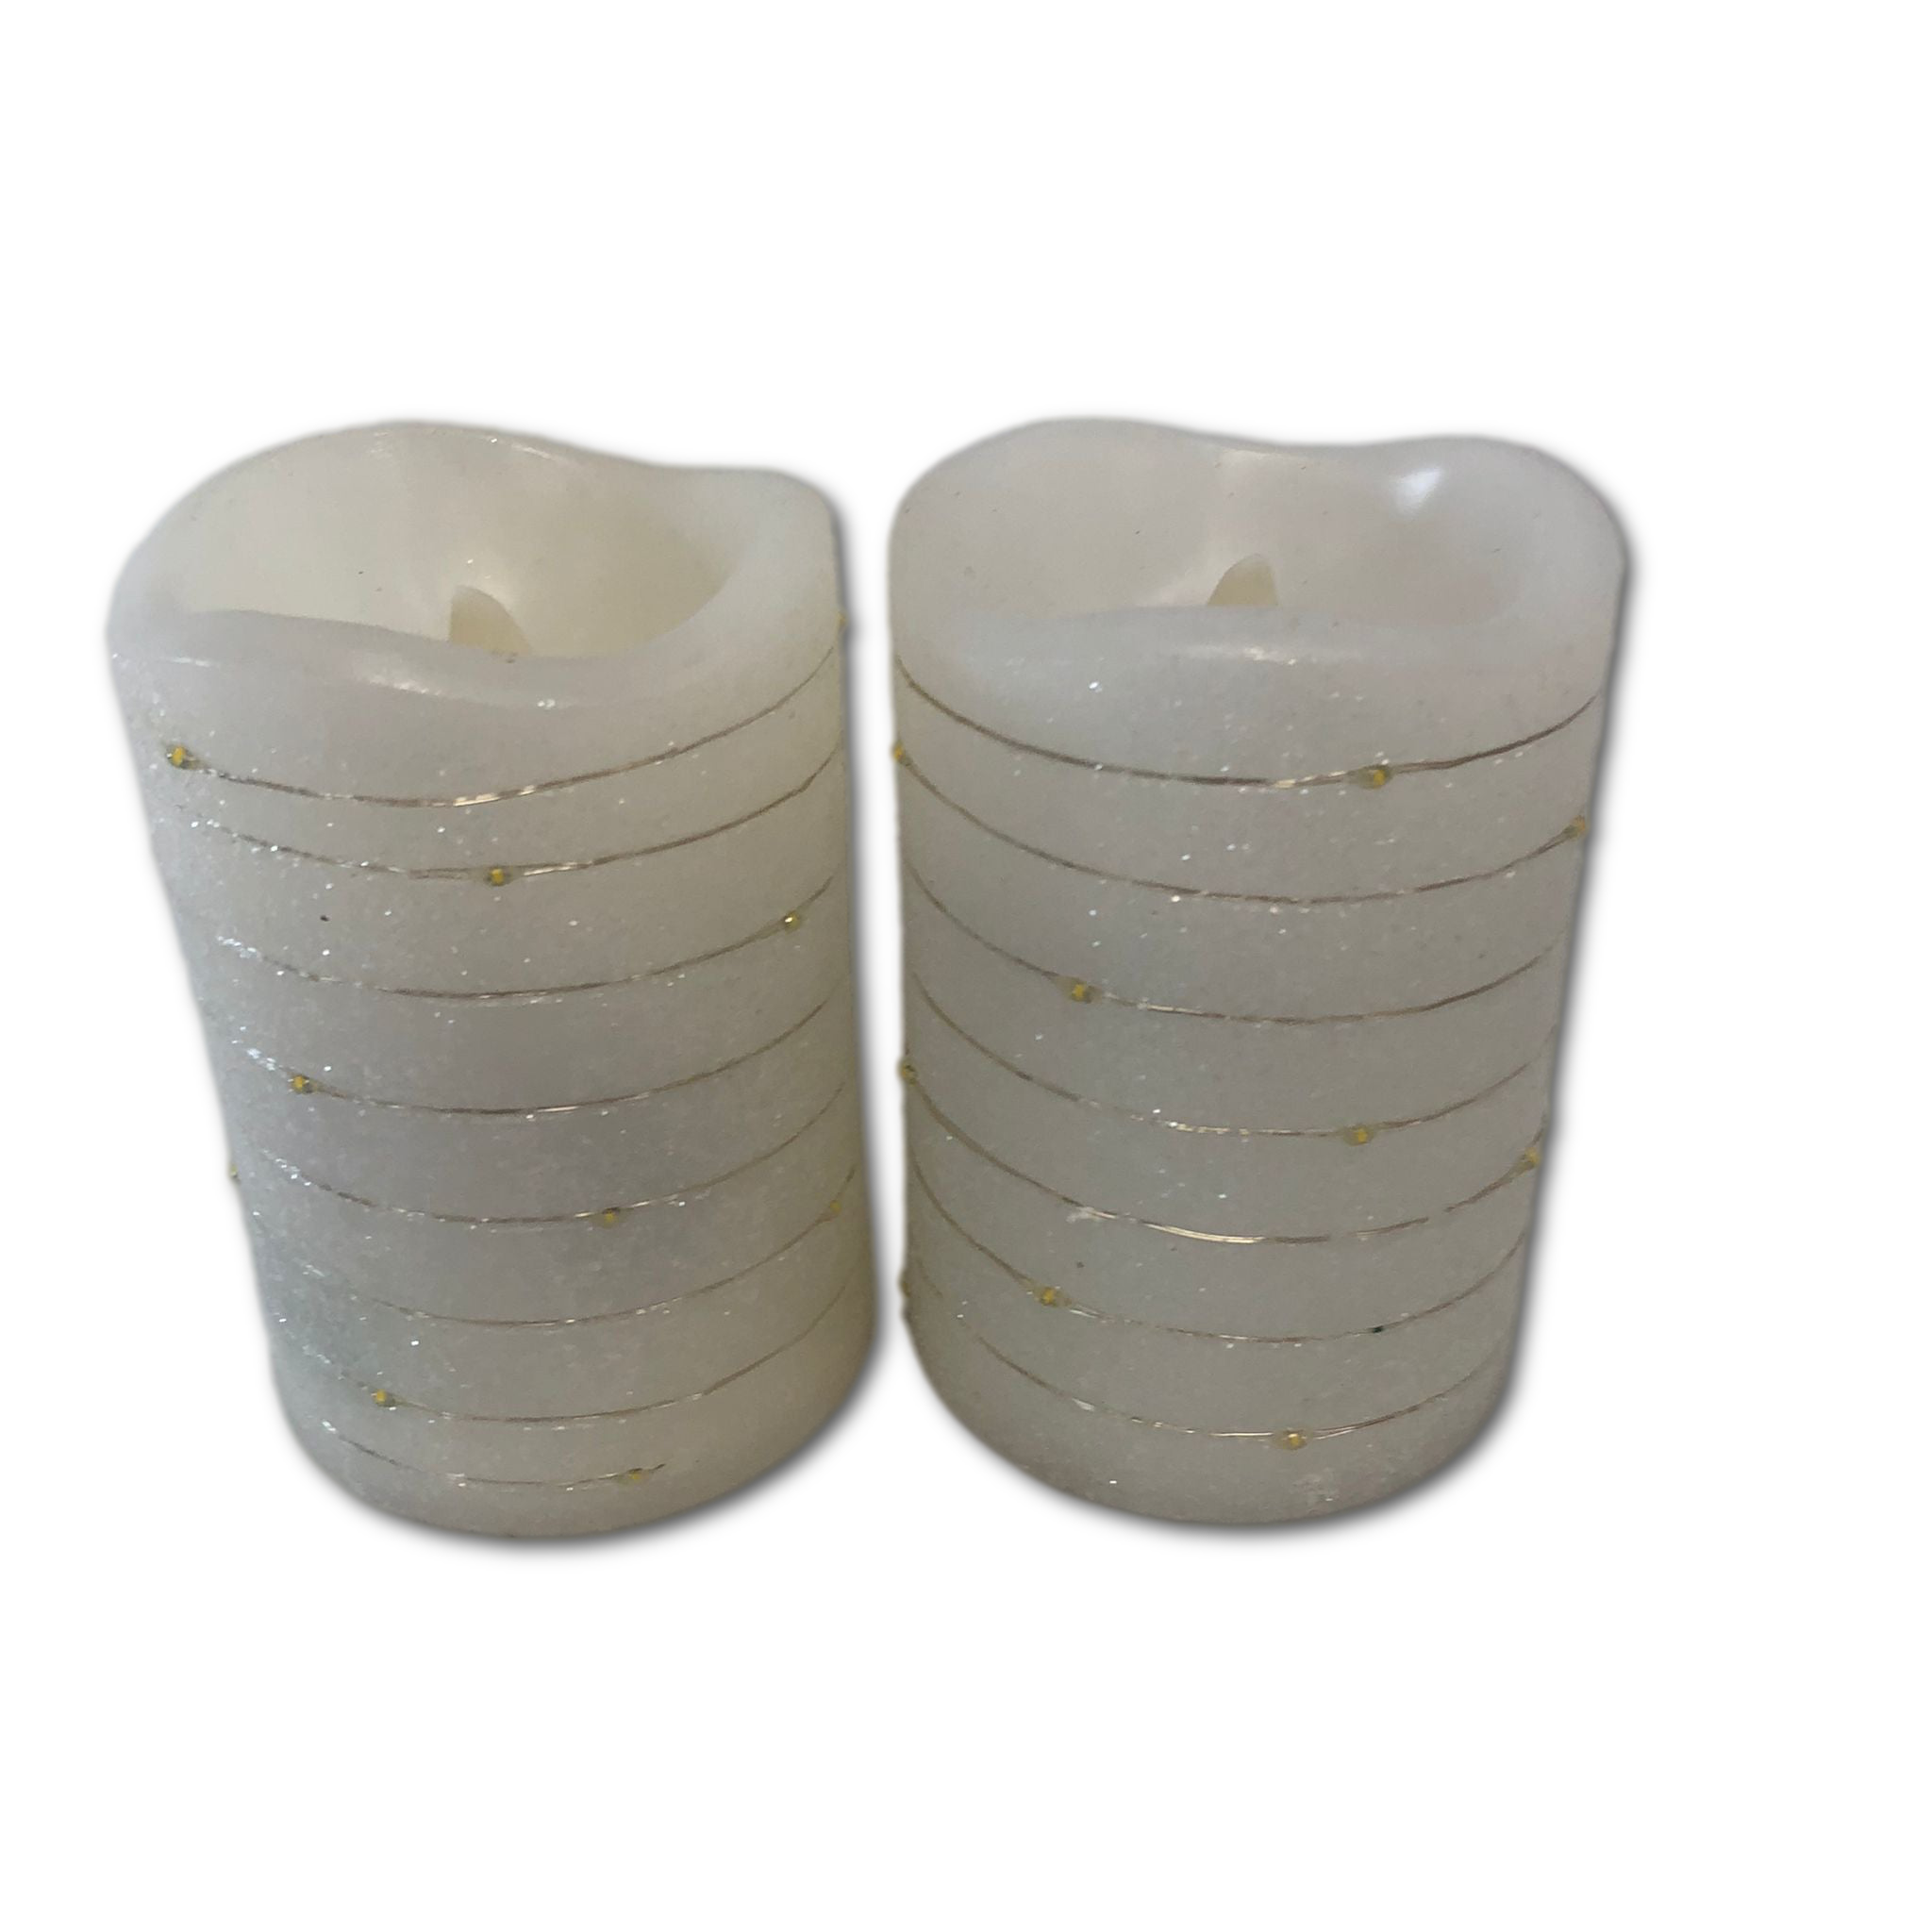 5" Flameless Candle, with Embedded Starlight String, set of 2